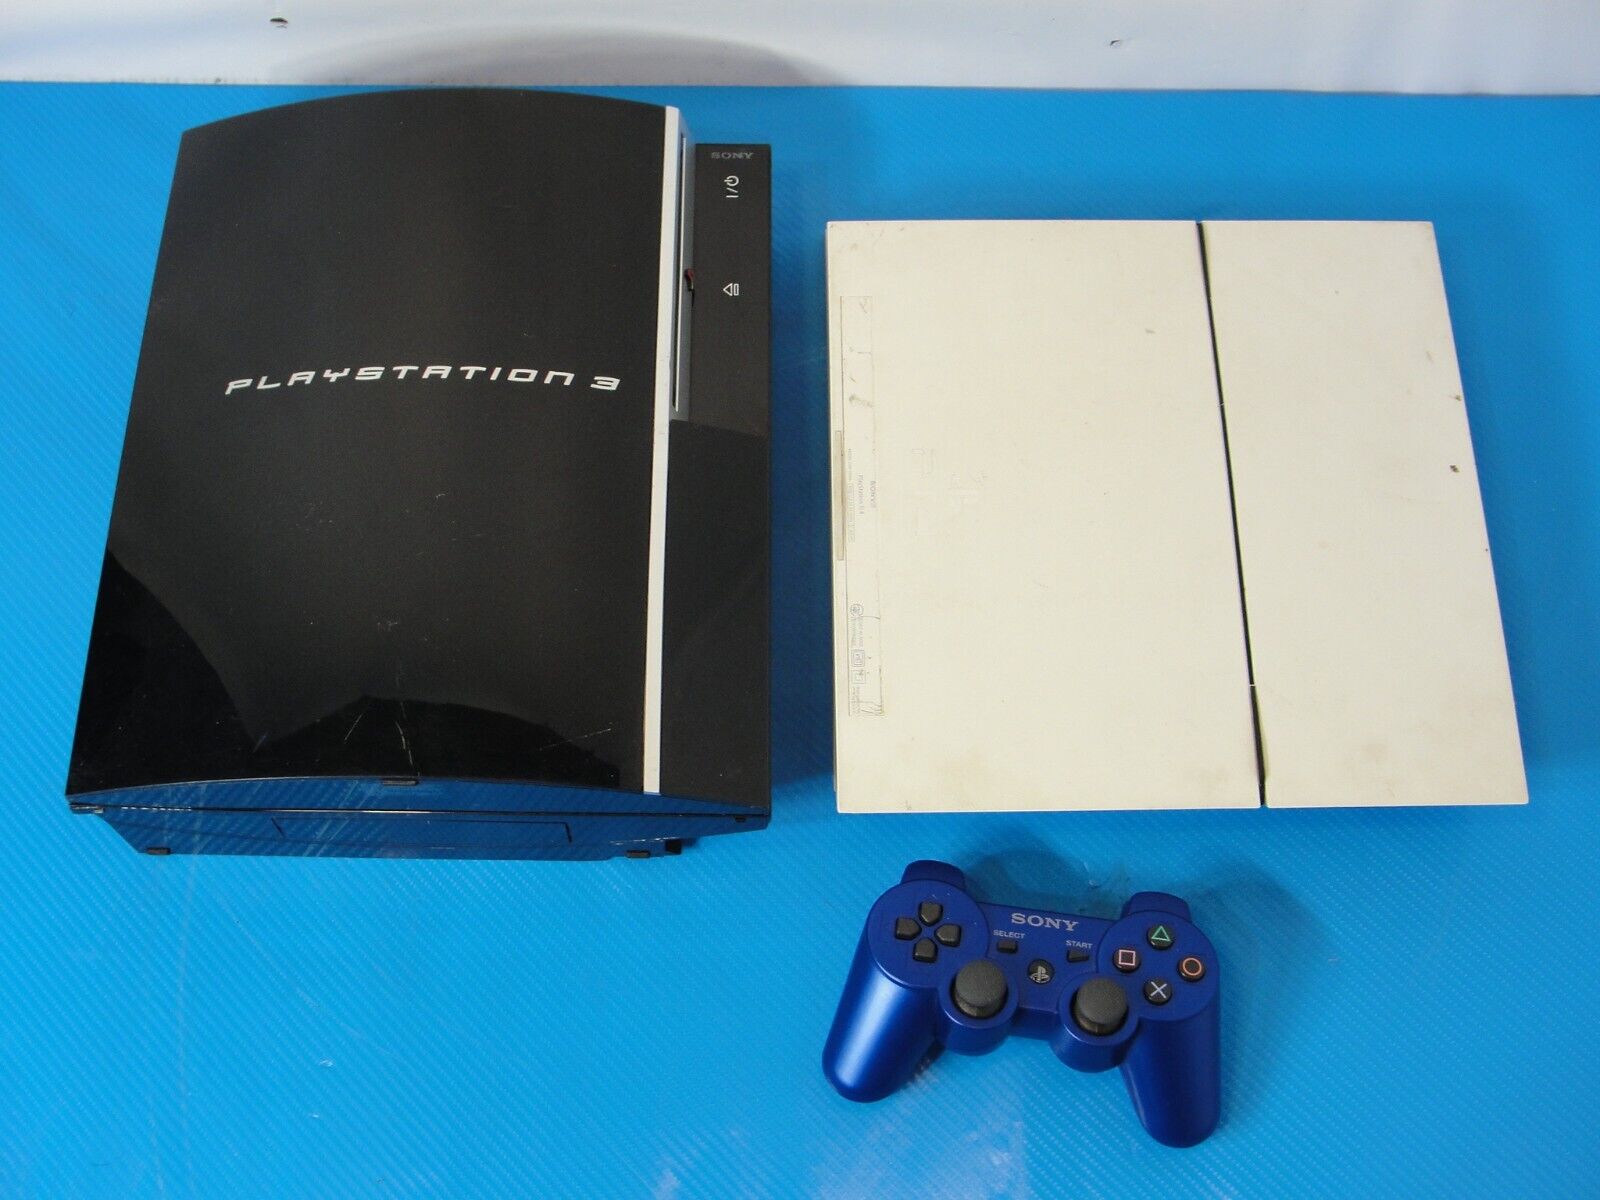 LOT of 2 PlayStation: Playstation 4 CUH-1100A, Playstation 3 CECHL01, Controller